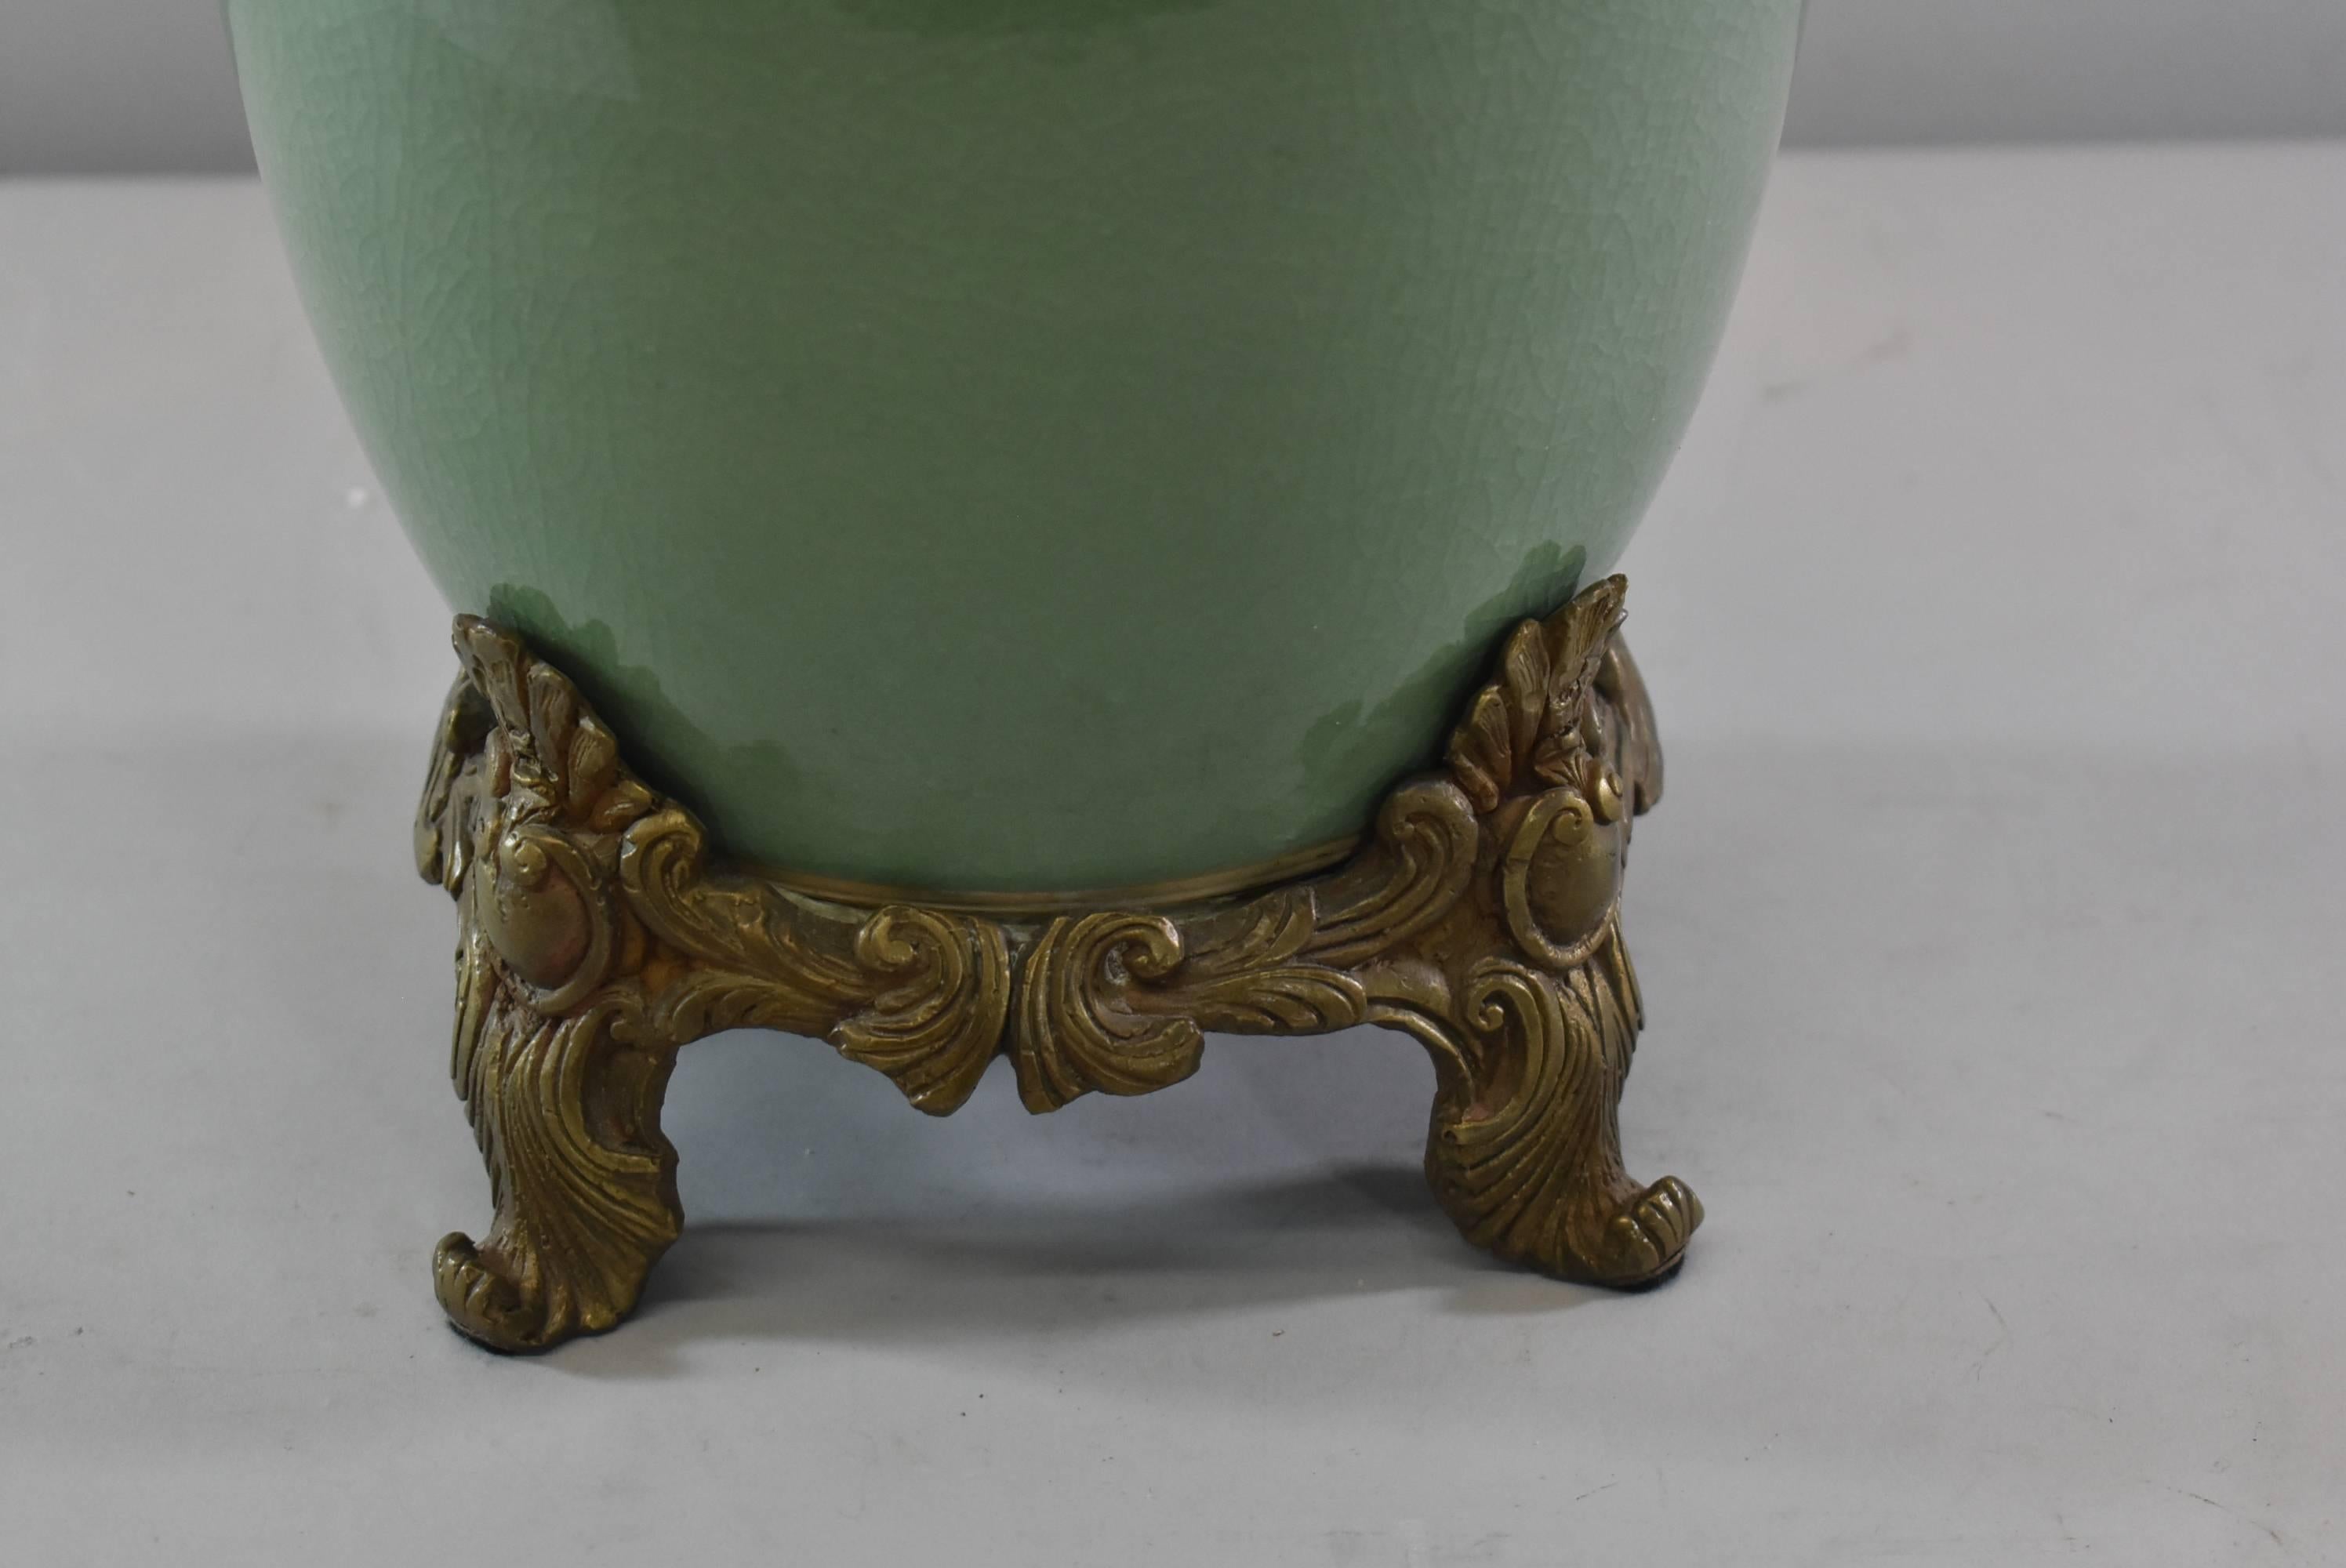 Asian Style celedon green porcelain and bronze single socket table lamp. Decorative ornate base in bronze with two applied handles on the side.